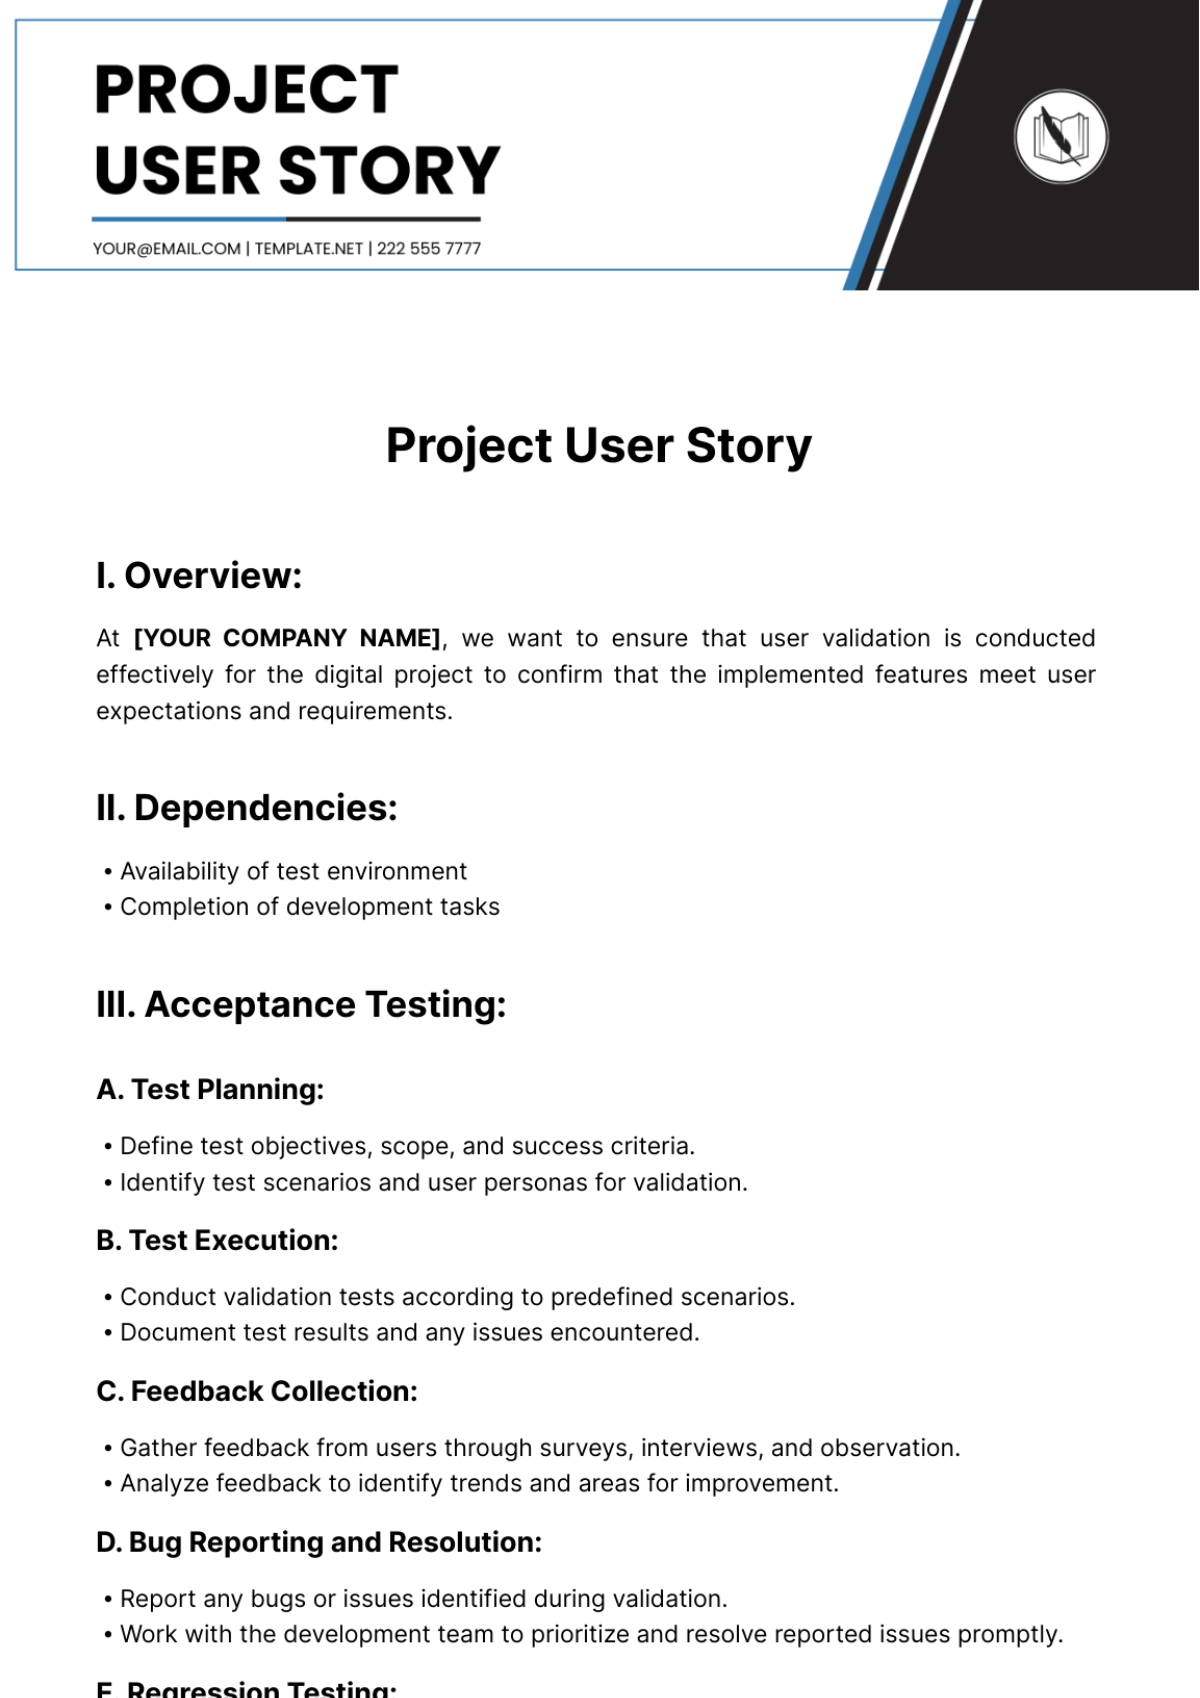 Project User Story Template